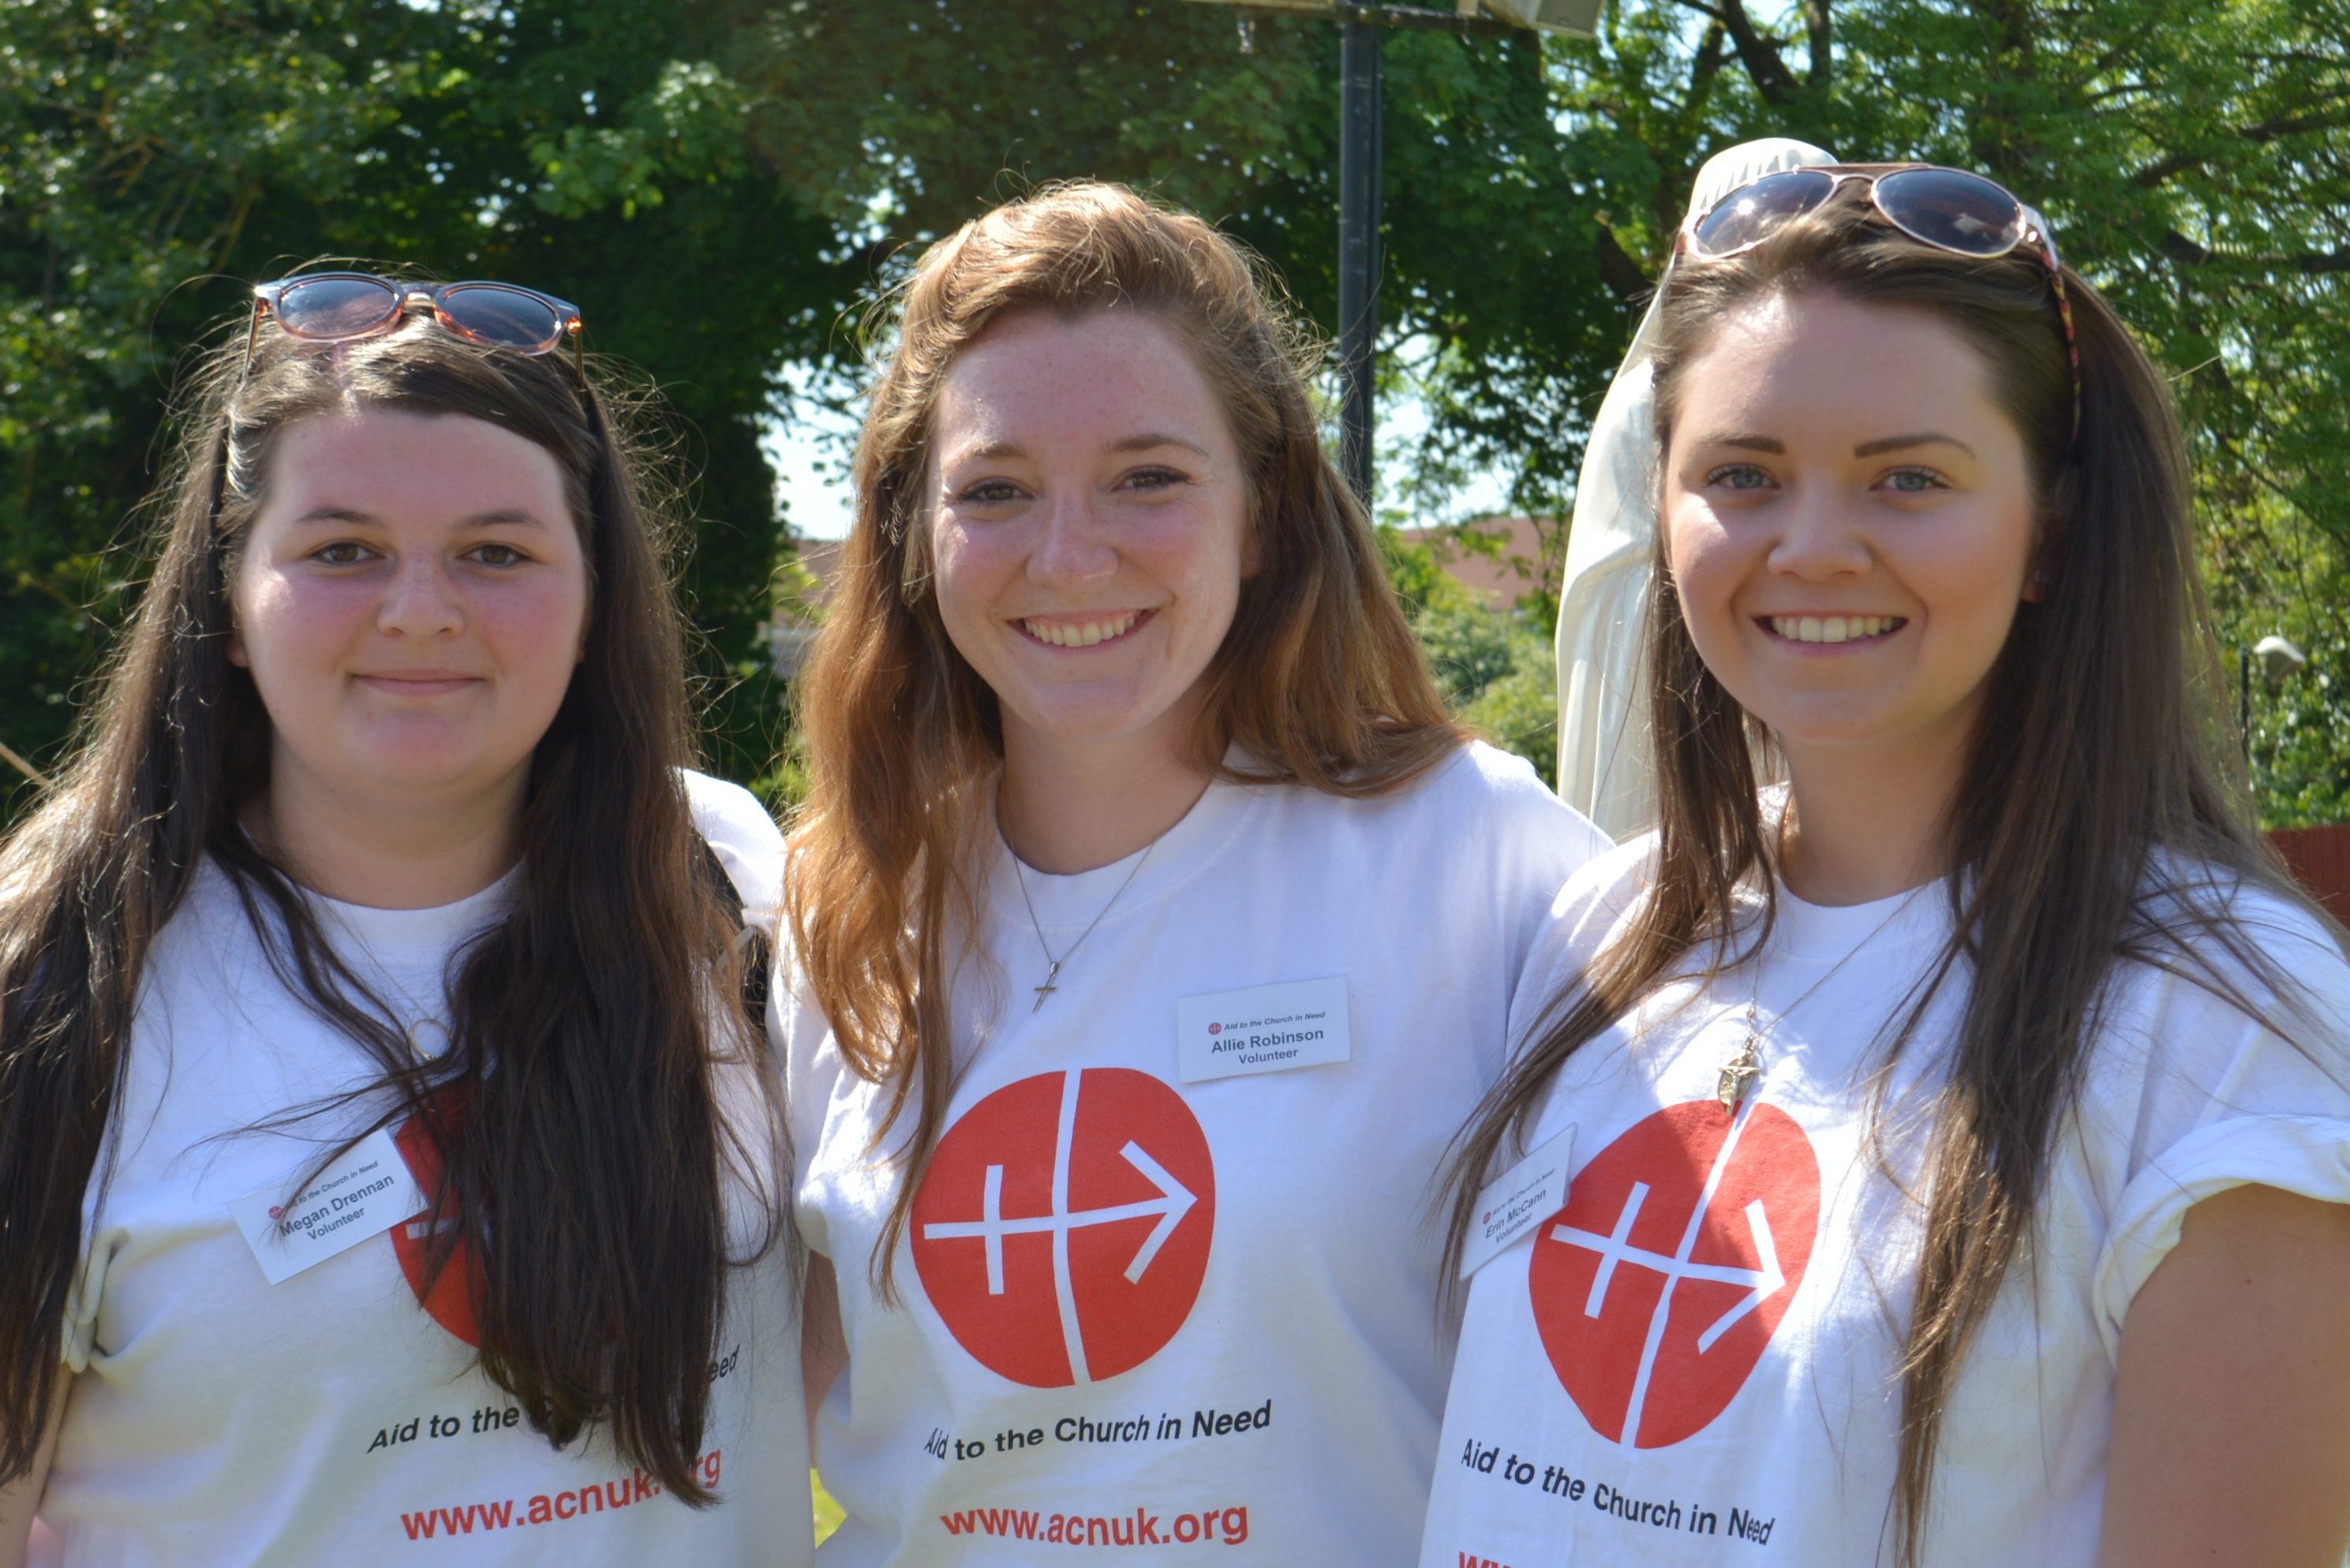 Young supporters of Aid to the Church in Need in Scotland (© Aid to the Church in Need)